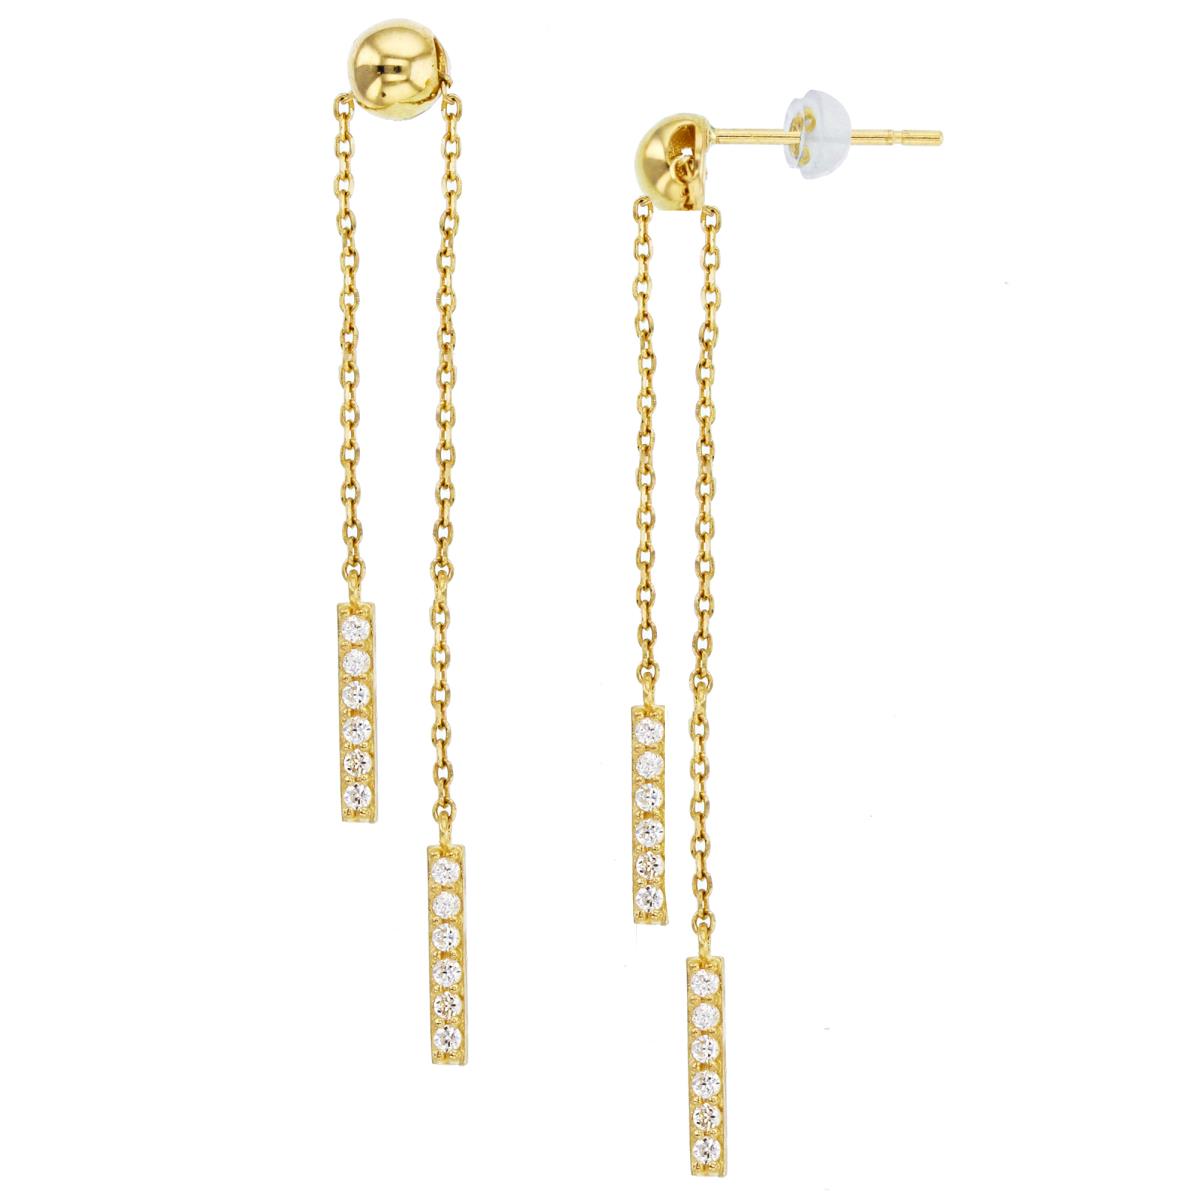 10K Yellow Gold High Polished & CZ Bars Dangling on Chain Earrings with Silicone Backs